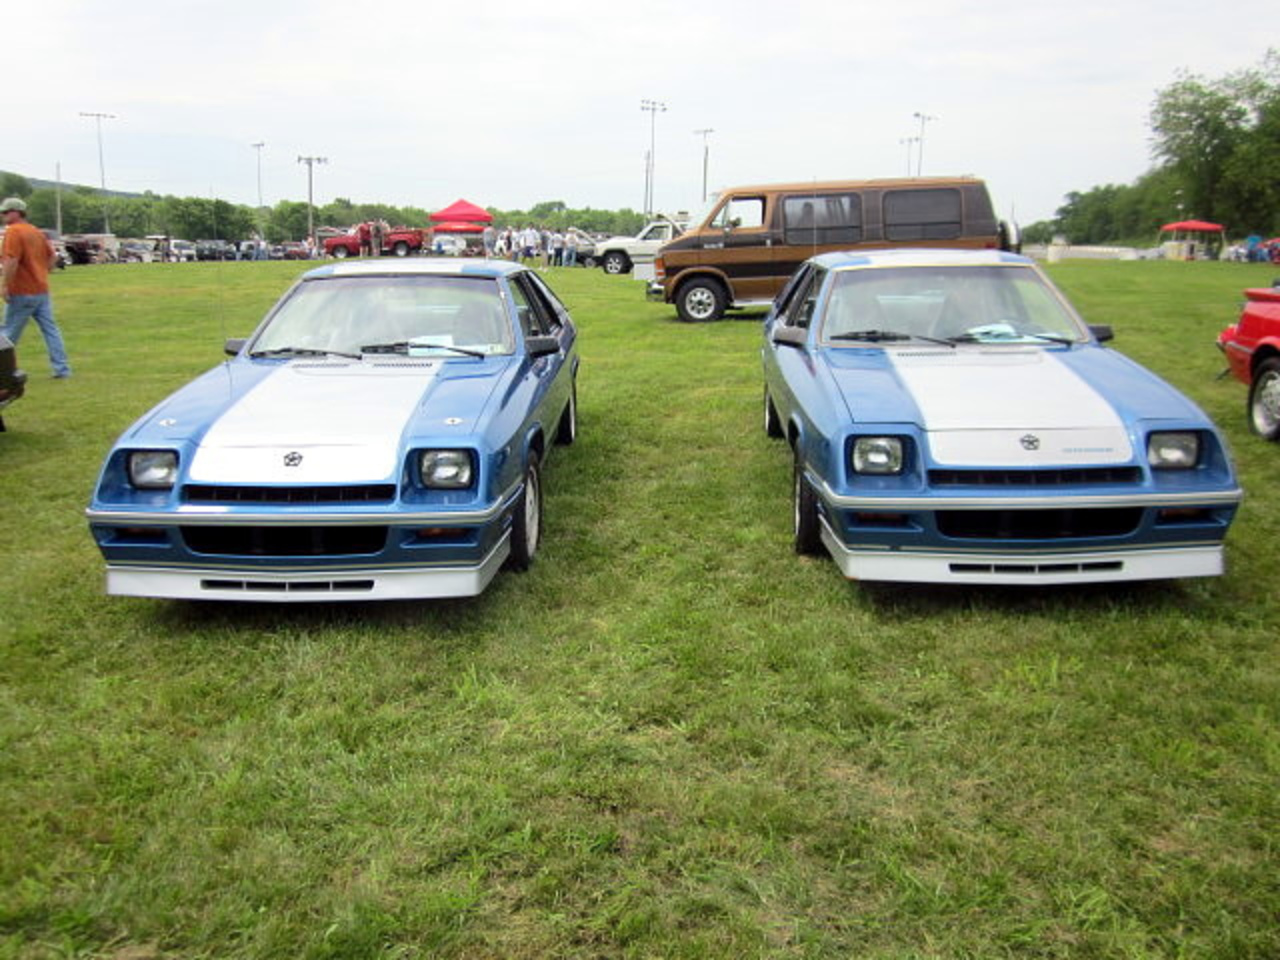 1983 Dodge Shelby Charger x2 | Flickr - Photo Sharing!